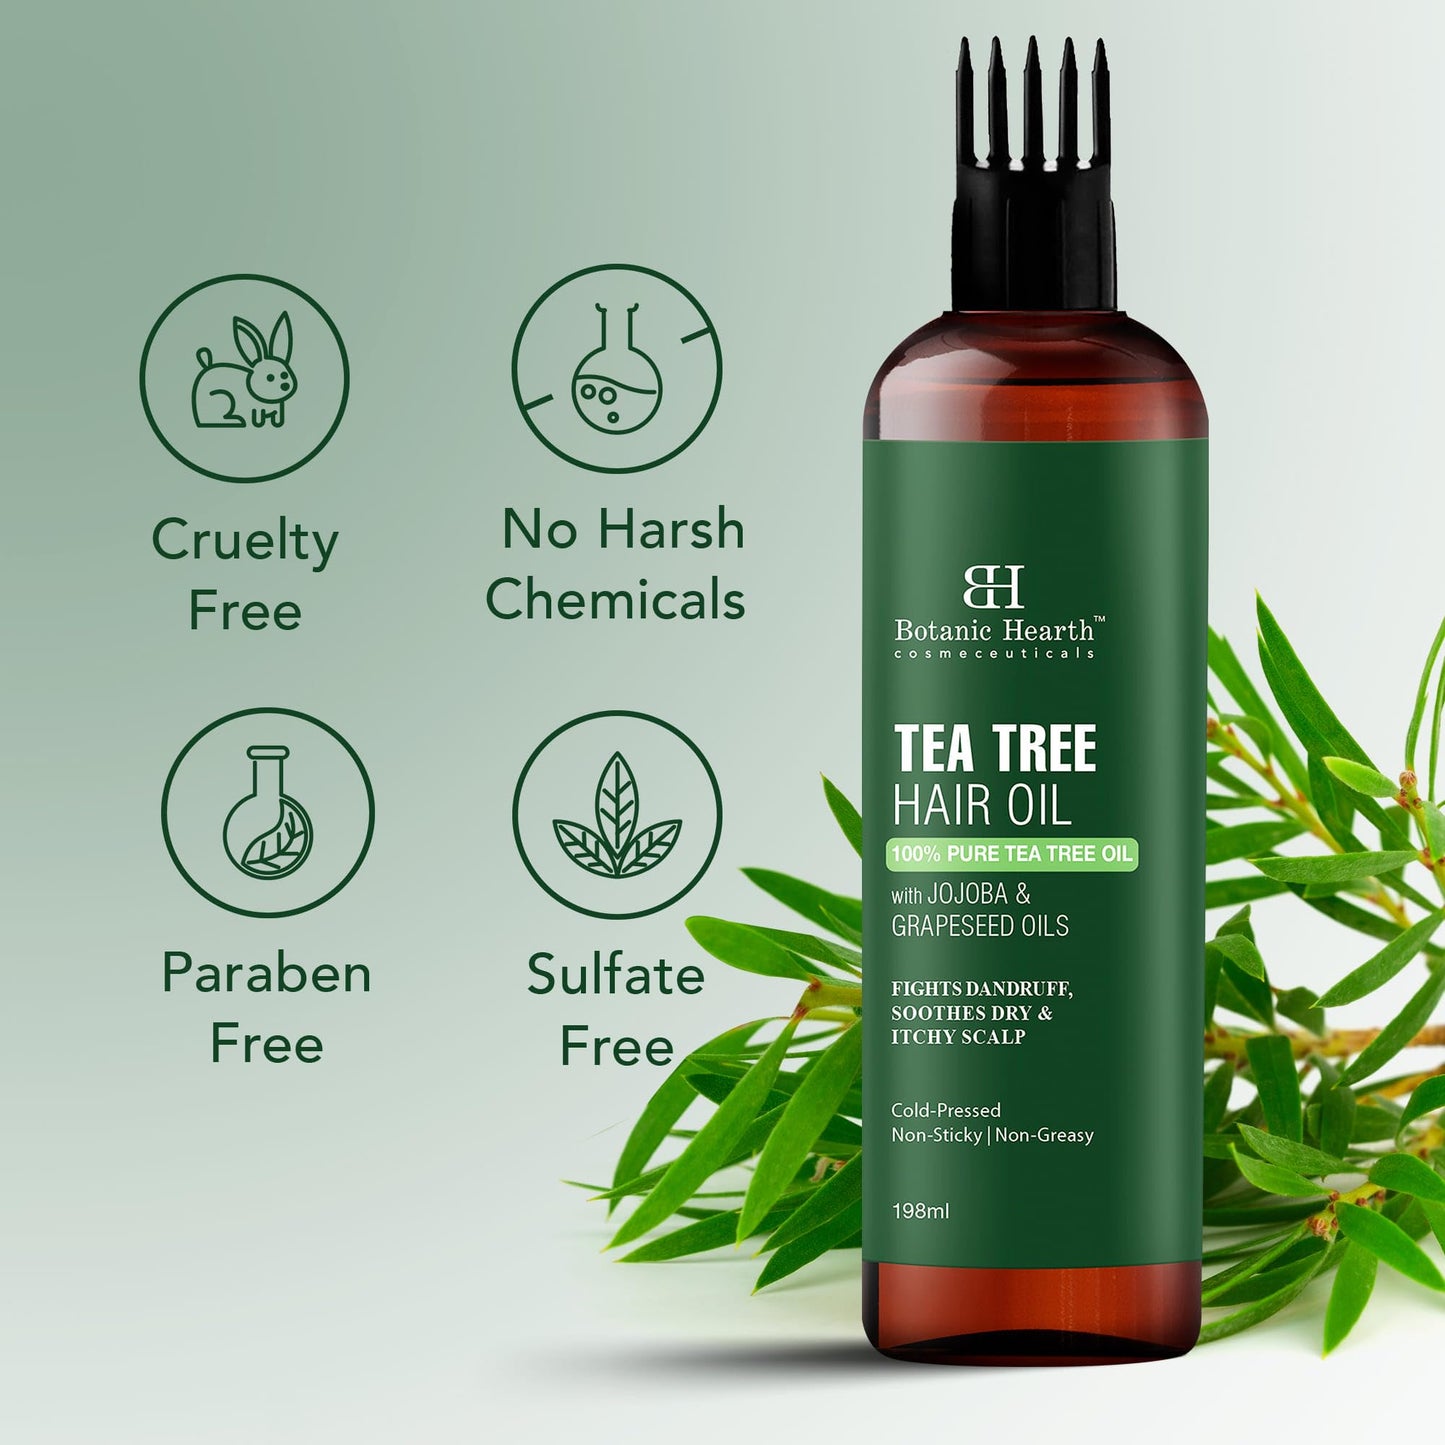 Botanic Hearth Tea Tree Oil for Hair | With Argan, Jojoba & Grapeseed Oils | Soothes Itchy Scalp & Fights Dandruff | Non GMO Verified | 6.7 fl oz